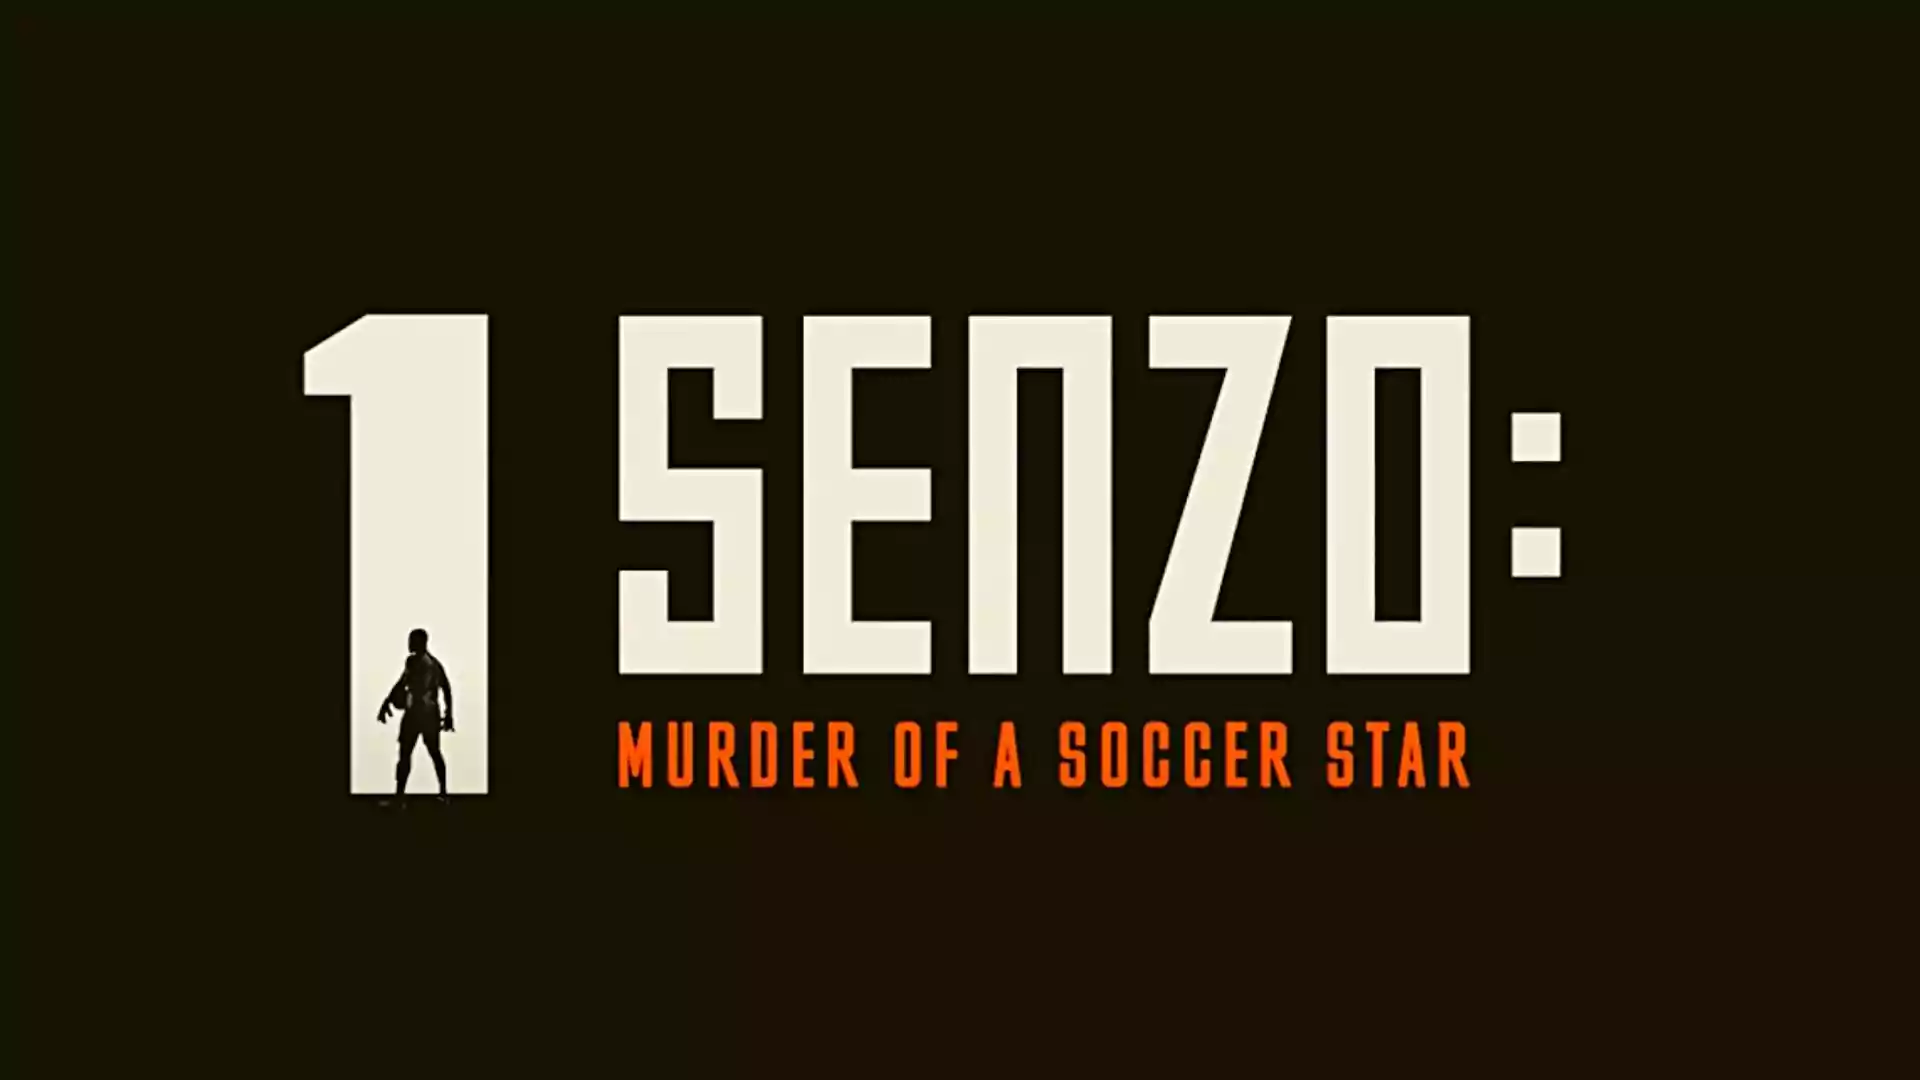 Senzo Murder of a Soccer Star Wallpaper and Image